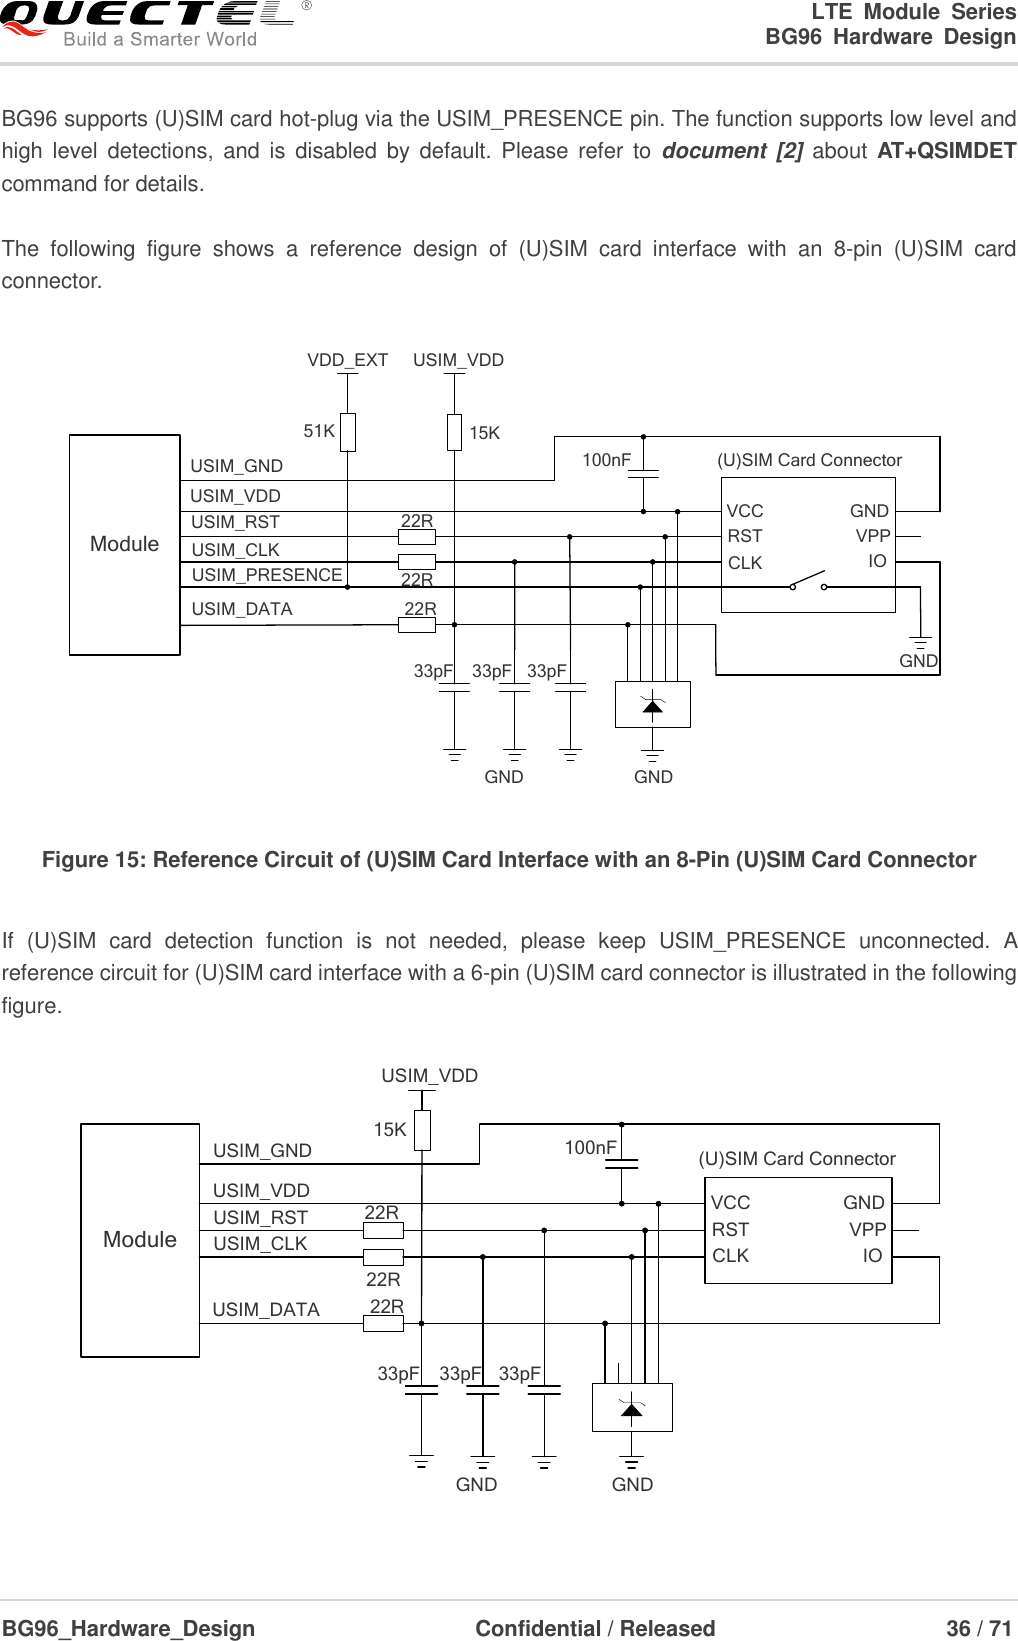 LTE  Module  Series                                                  BG96  Hardware  Design  BG96_Hardware_Design                              Confidential / Released                             36 / 71    BG96 supports (U)SIM card hot-plug via the USIM_PRESENCE pin. The function supports low level and high  level  detections, and  is  disabled  by  default.  Please  refer to  document [2]  about  AT+QSIMDET command for details.  The  following  figure  shows  a  reference  design  of  (U)SIM  card  interface  with  an  8-pin  (U)SIM  card connector. ModuleUSIM_VDDUSIM_GNDUSIM_RSTUSIM_CLKUSIM_DATAUSIM_PRESENCE22R22R22RVDD_EXT51K100nF (U)SIM Card ConnectorGNDGND33pF 33pF 33pFVCCRSTCLK IOVPPGNDGNDUSIM_VDD15K Figure 15: Reference Circuit of (U)SIM Card Interface with an 8-Pin (U)SIM Card Connector  If  (U)SIM  card  detection  function  is  not  needed,  please  keep  USIM_PRESENCE  unconnected.  A reference circuit for (U)SIM card interface with a 6-pin (U)SIM card connector is illustrated in the following figure. ModuleUSIM_VDDUSIM_GNDUSIM_RSTUSIM_CLKUSIM_DATA 22R22R22R100nF (U)SIM Card ConnectorGND33pF 33pF 33pFVCCRSTCLK IOVPPGNDGND15KUSIM_VDD 